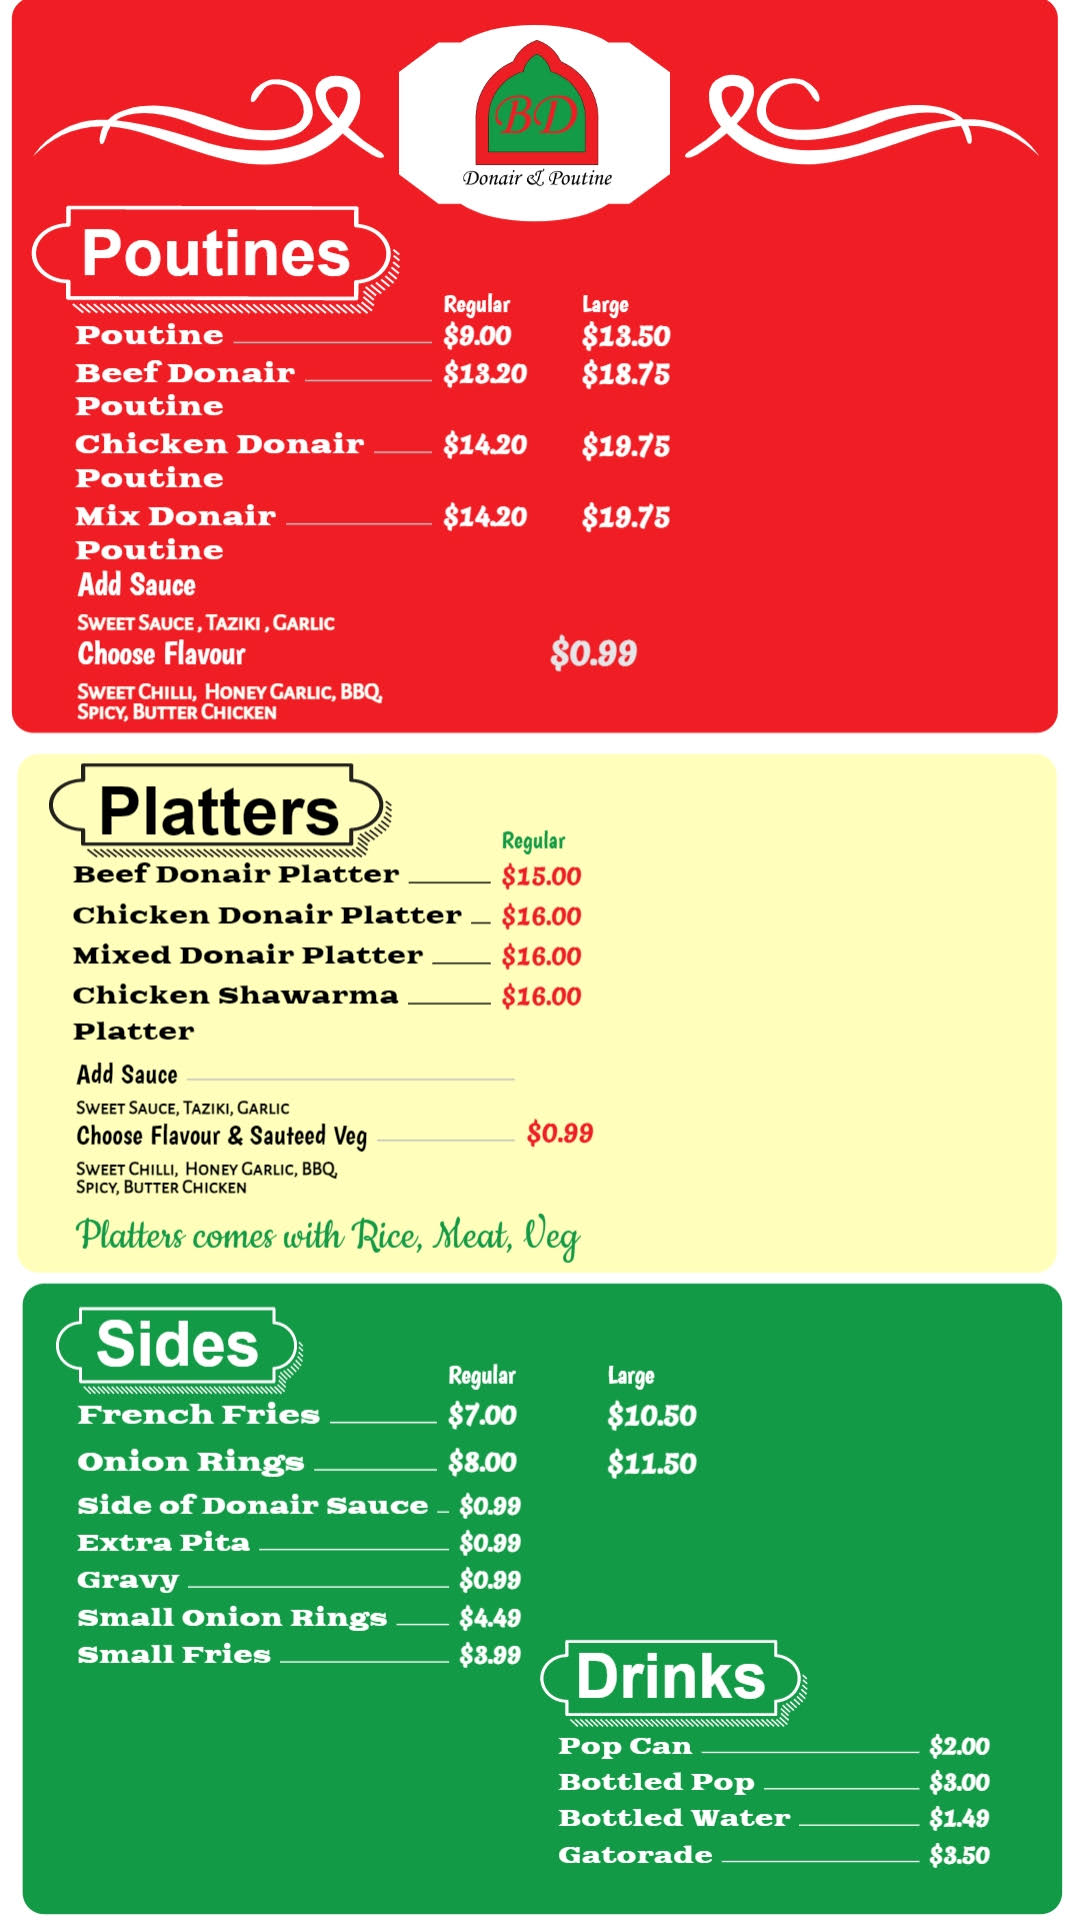 Poutines-Platters-Sides-Drinks